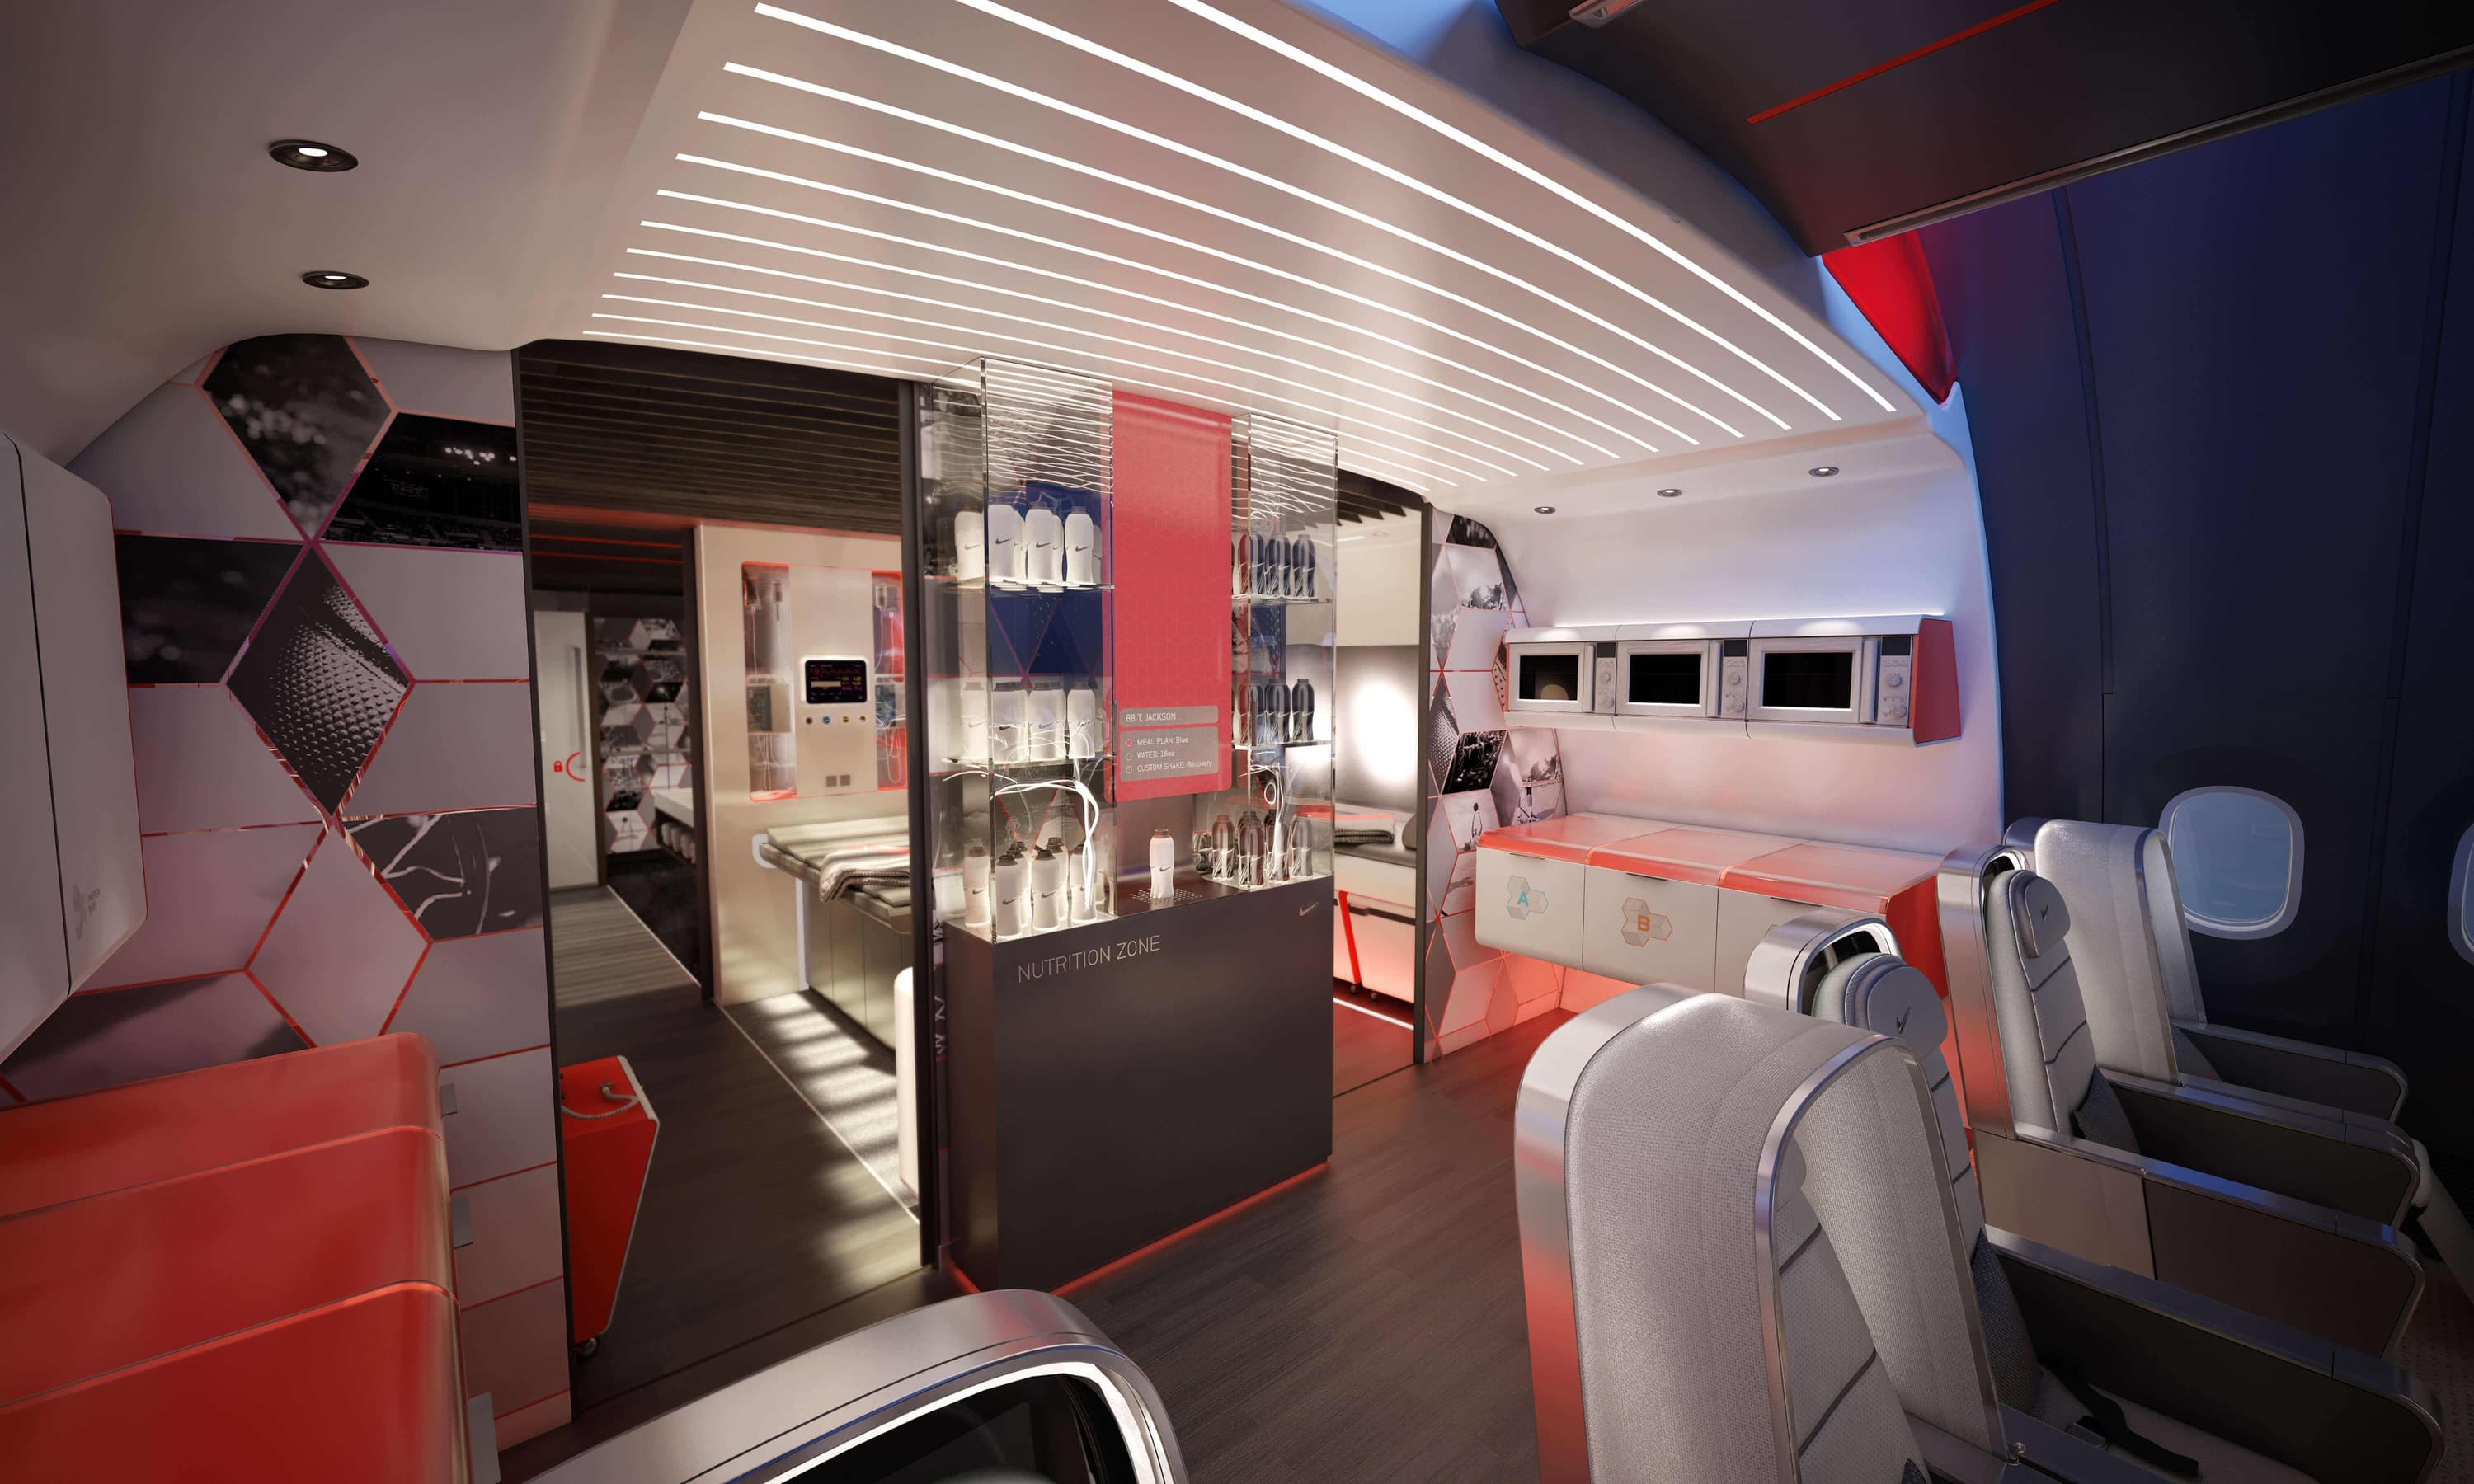 Interior of Teague's 787 airplane designed for Nike with red and black color theme